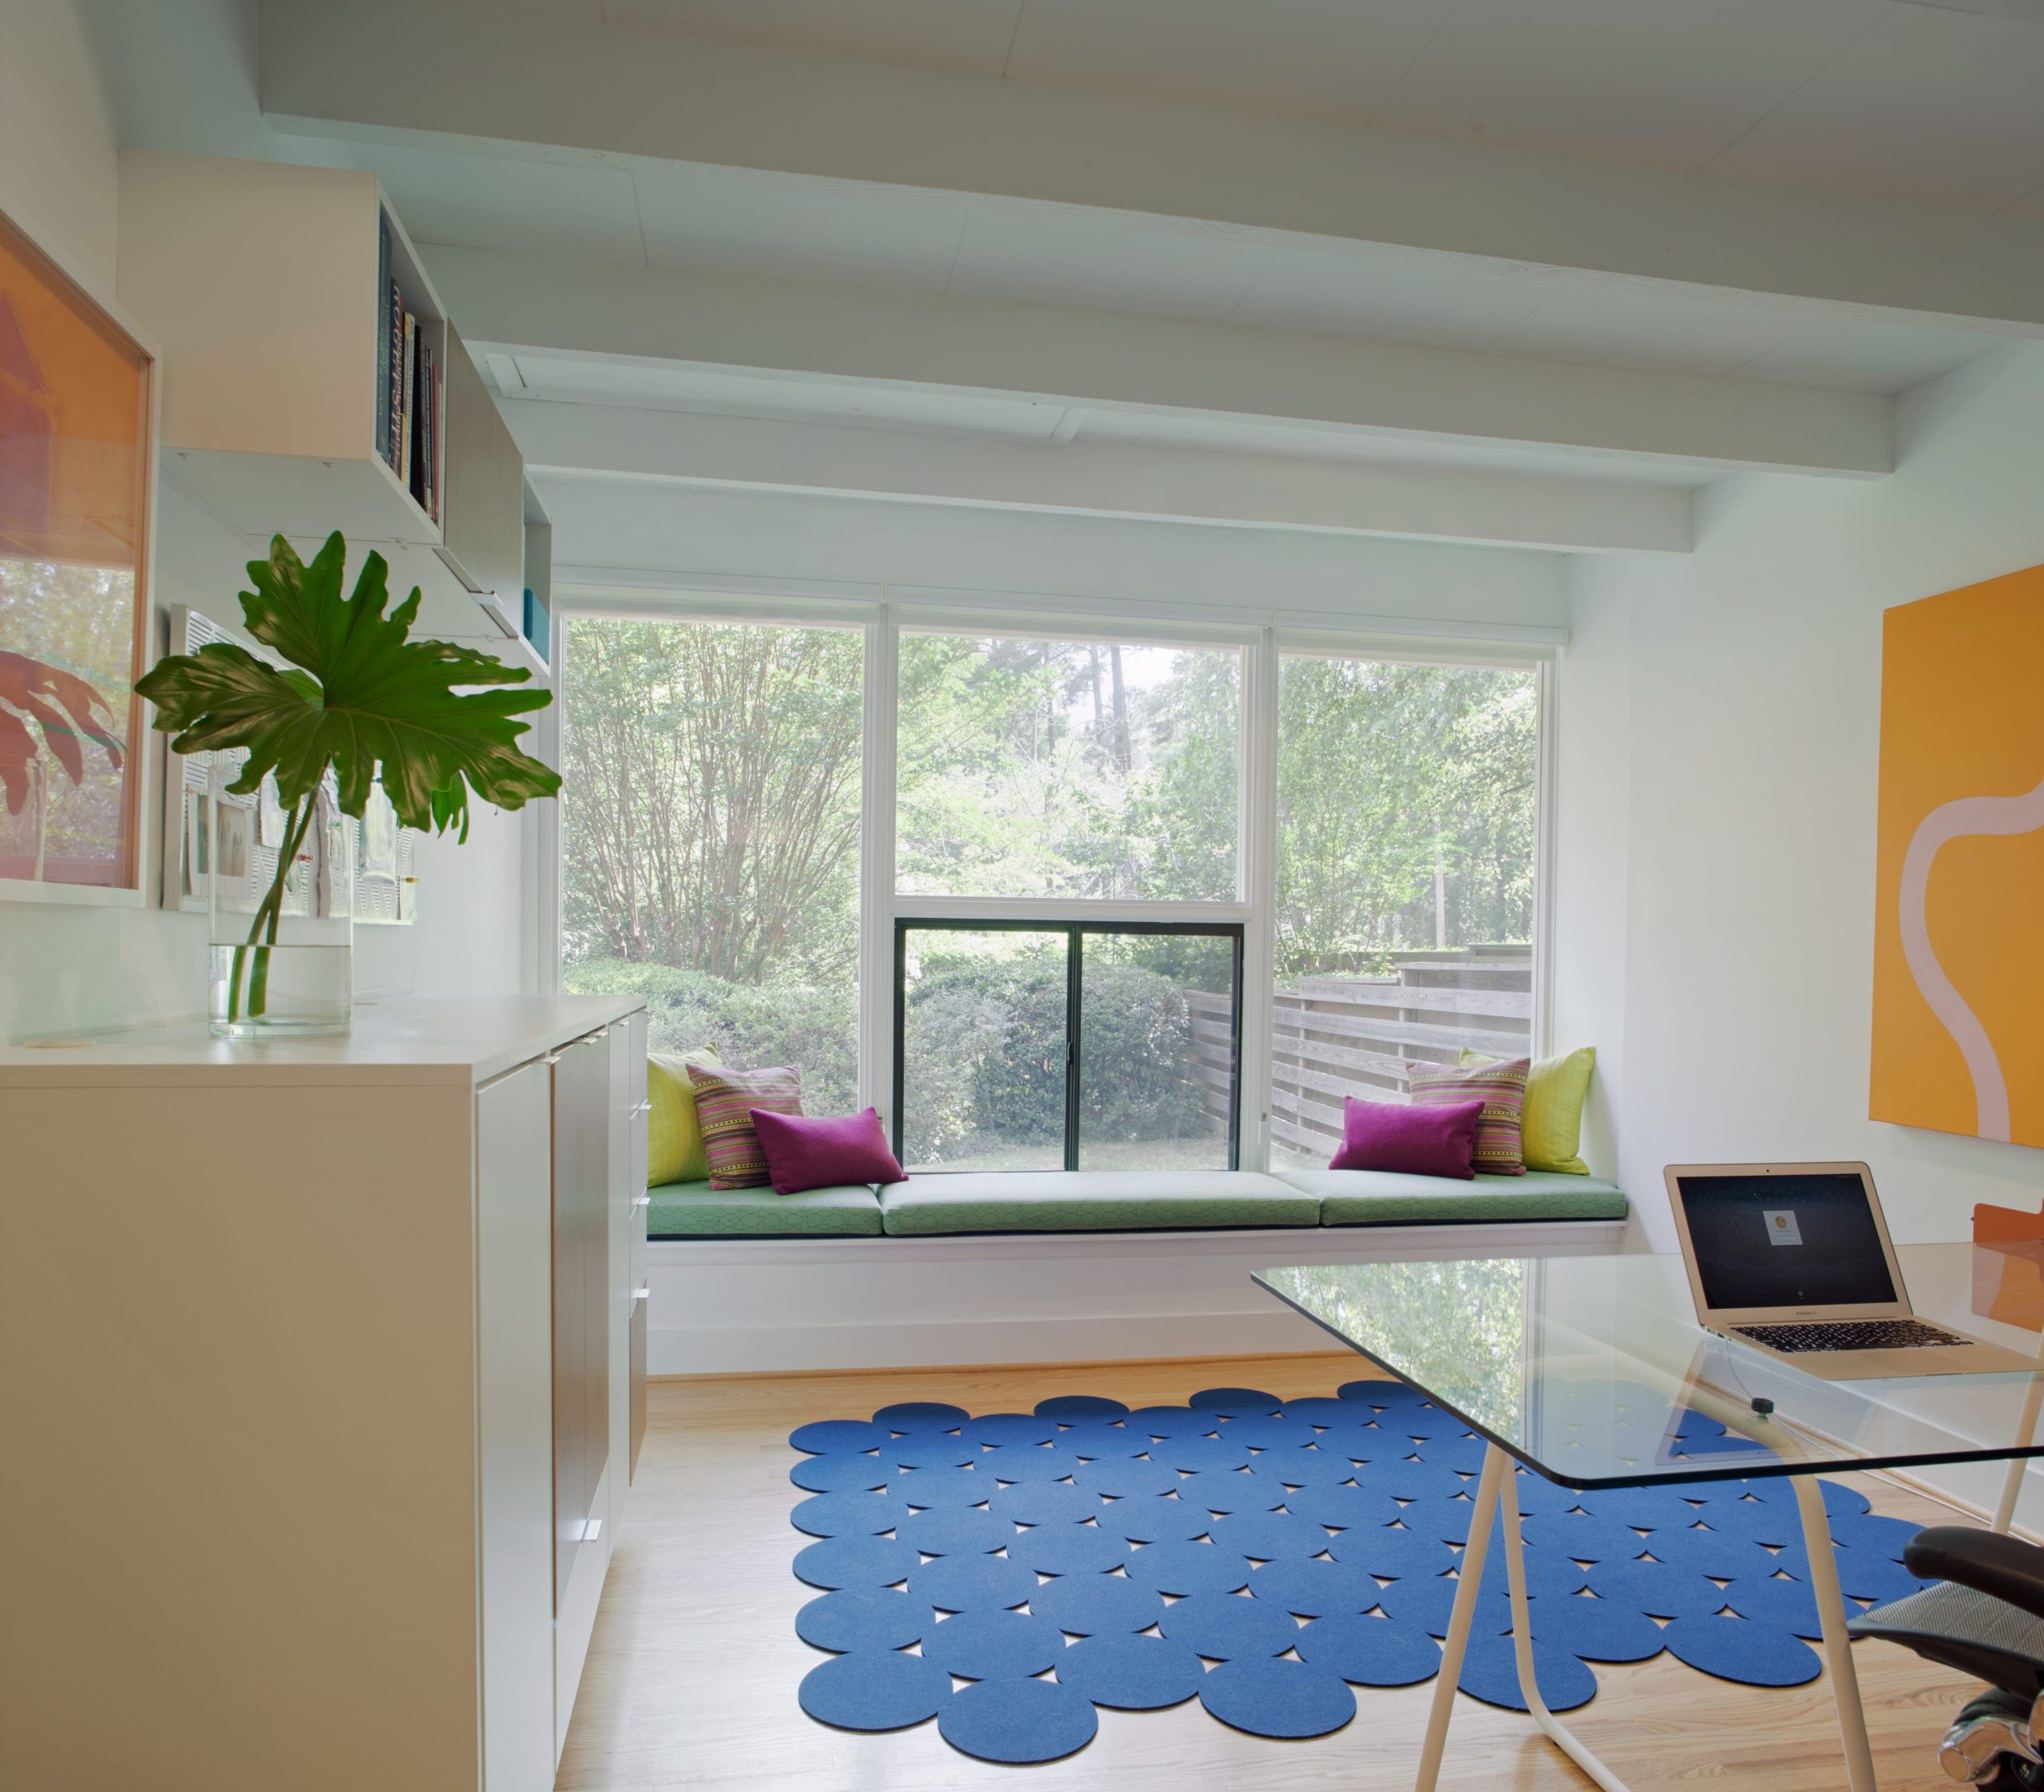 Colorful and bright office space with built-in window seat